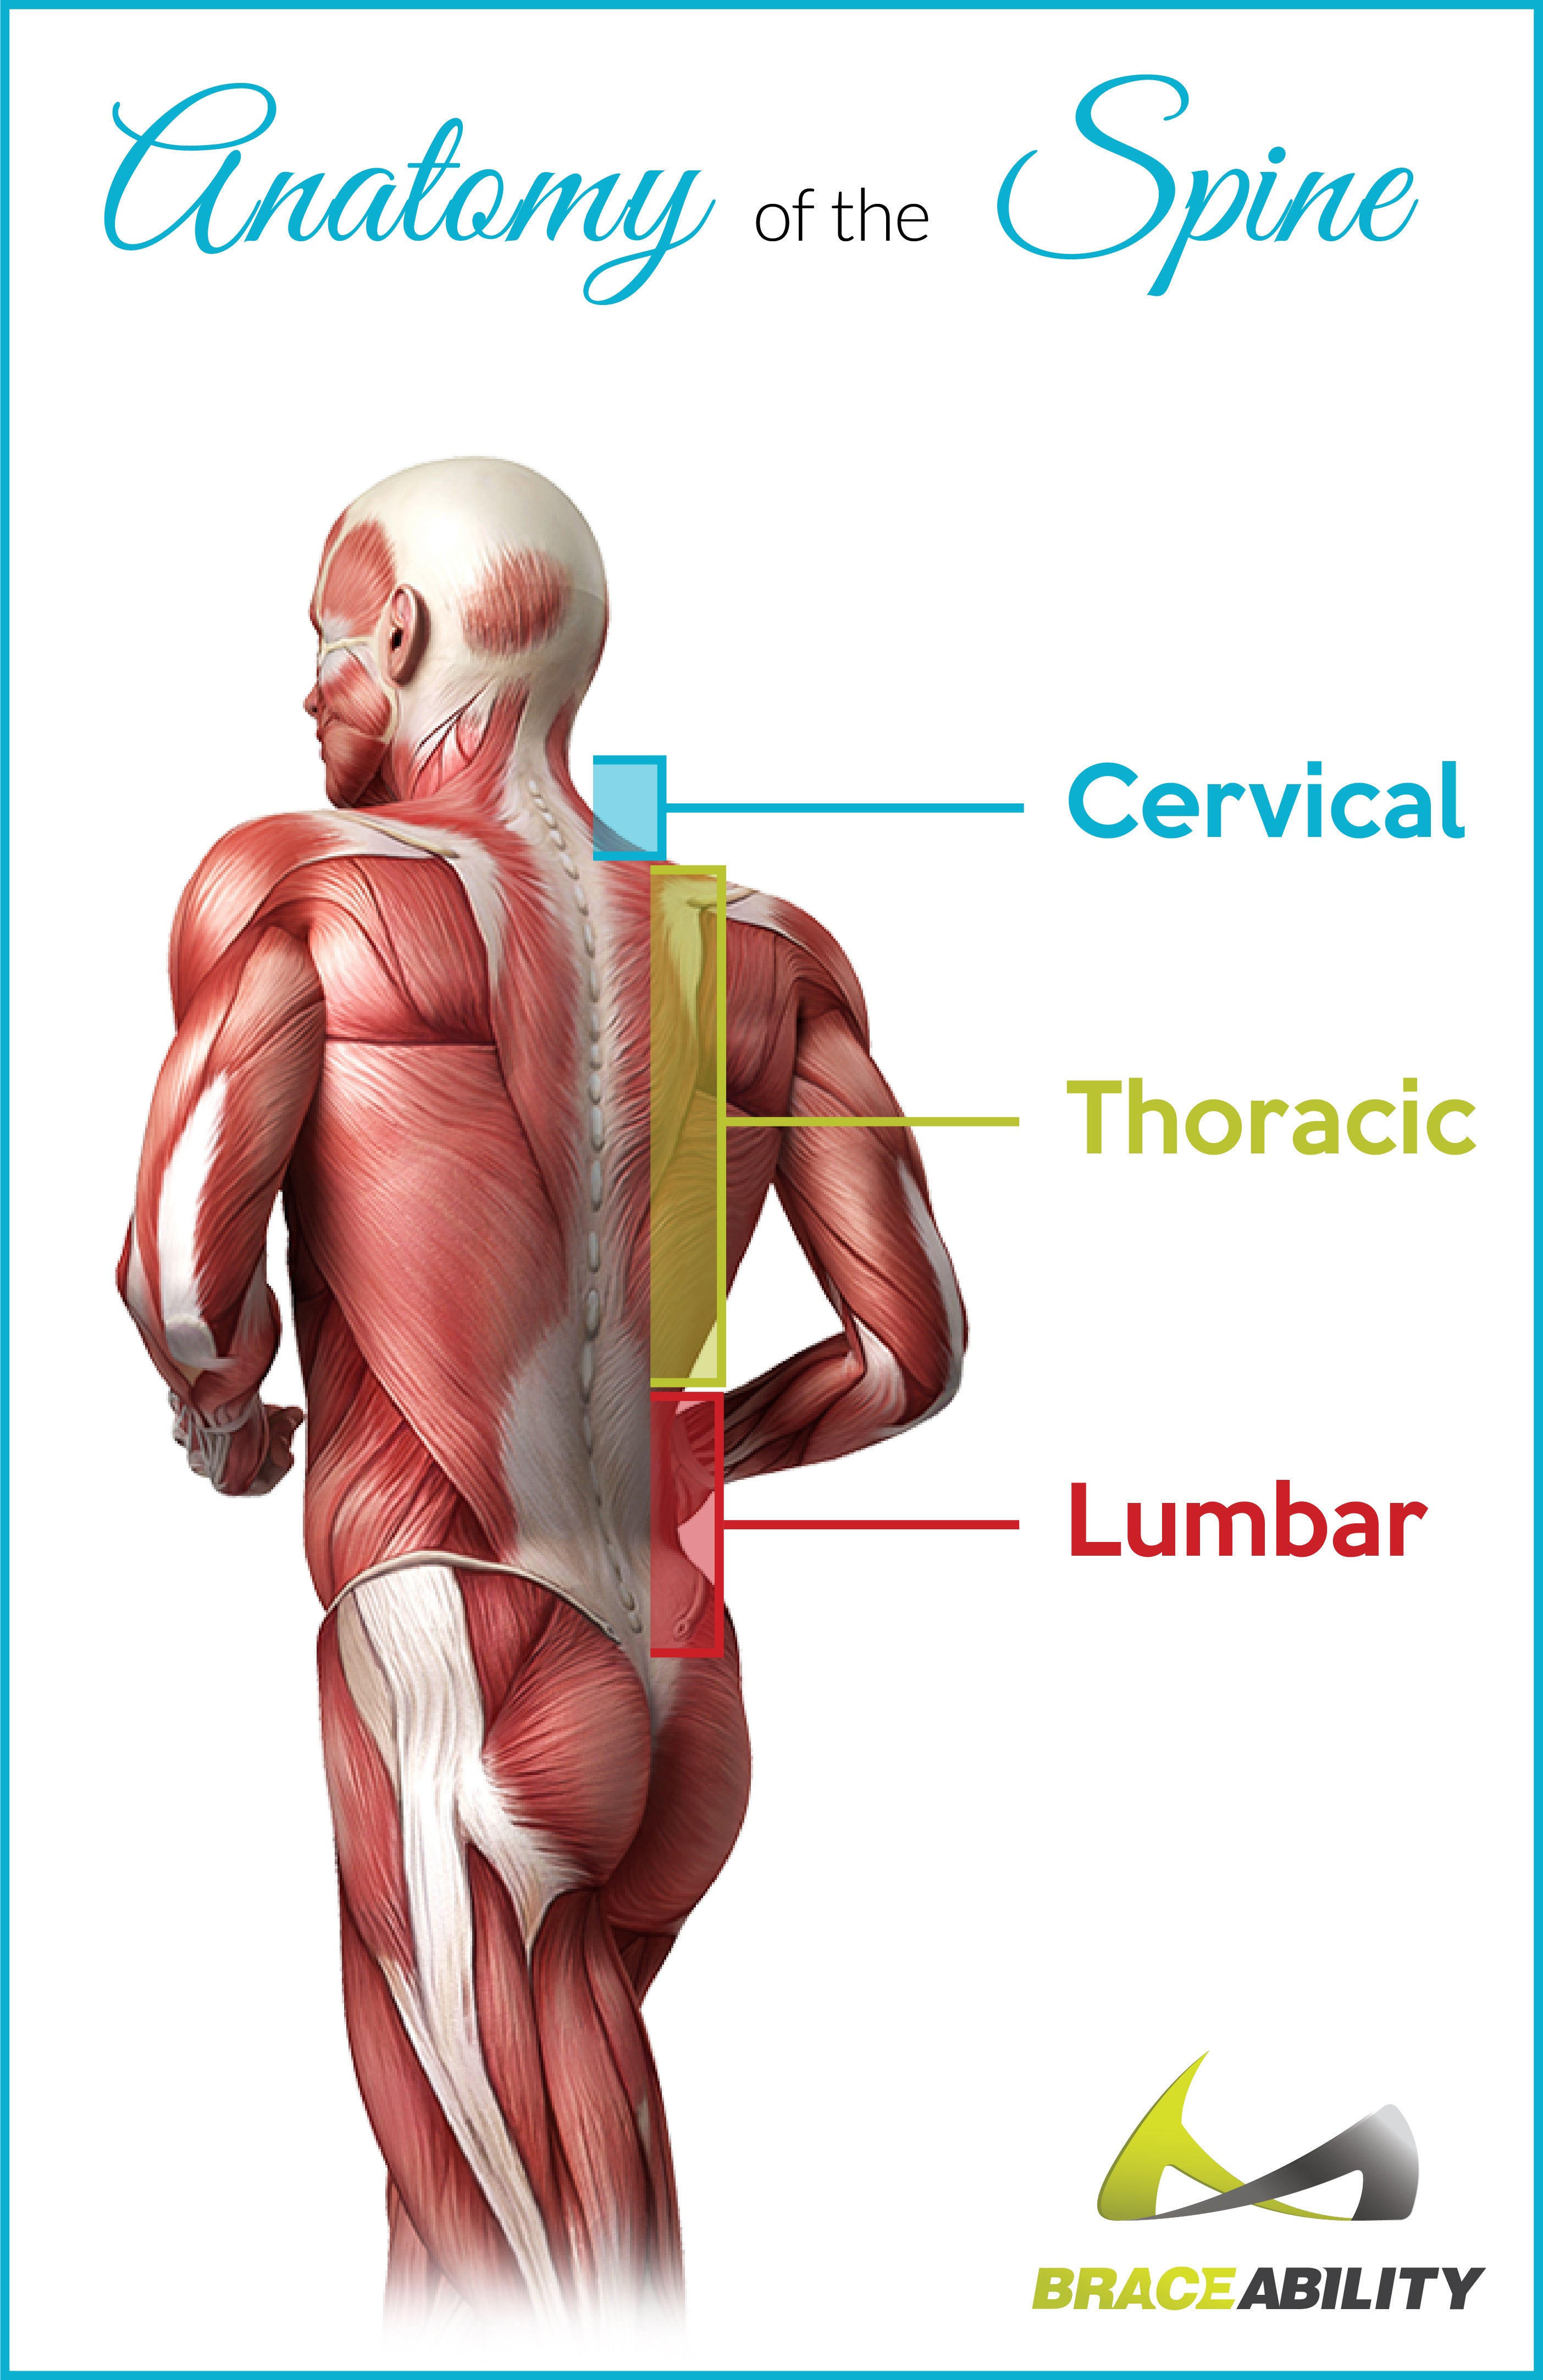 learn about the anatomy of the spine and causes of injury, strain, or illness